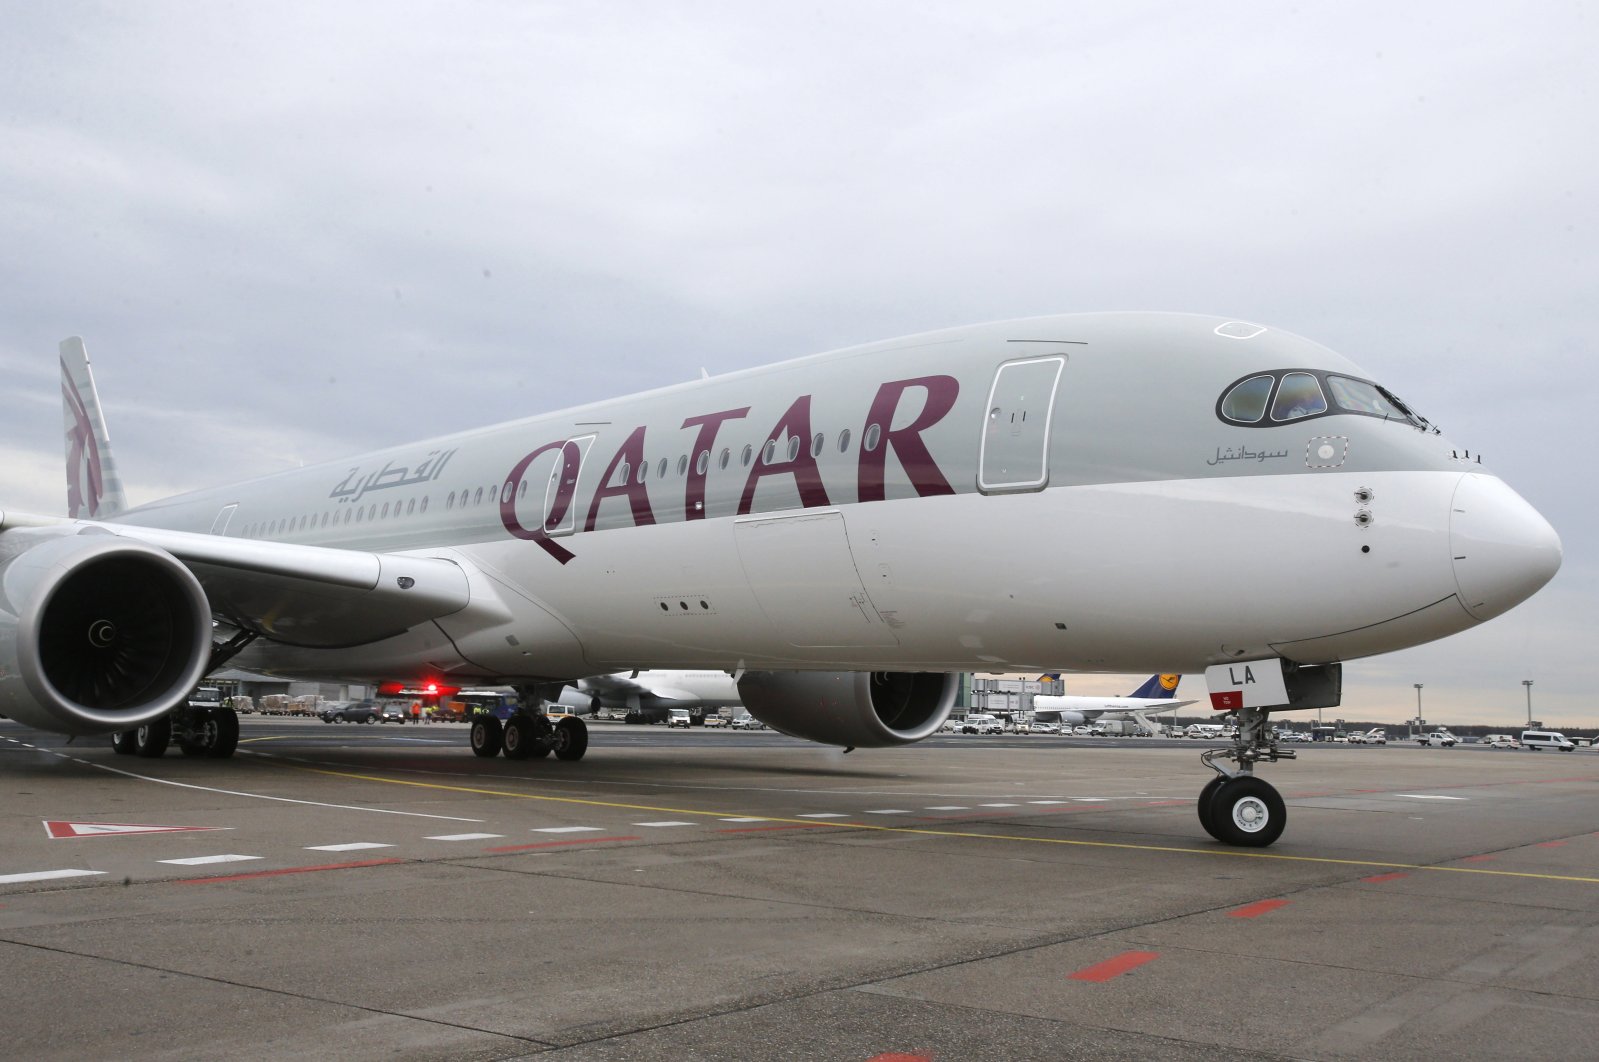 A new Qatar Airways Airbus A350 approaches the gate at the airport in Frankfurt, Germany, Jan. 15, 2015.  (AP Photo)